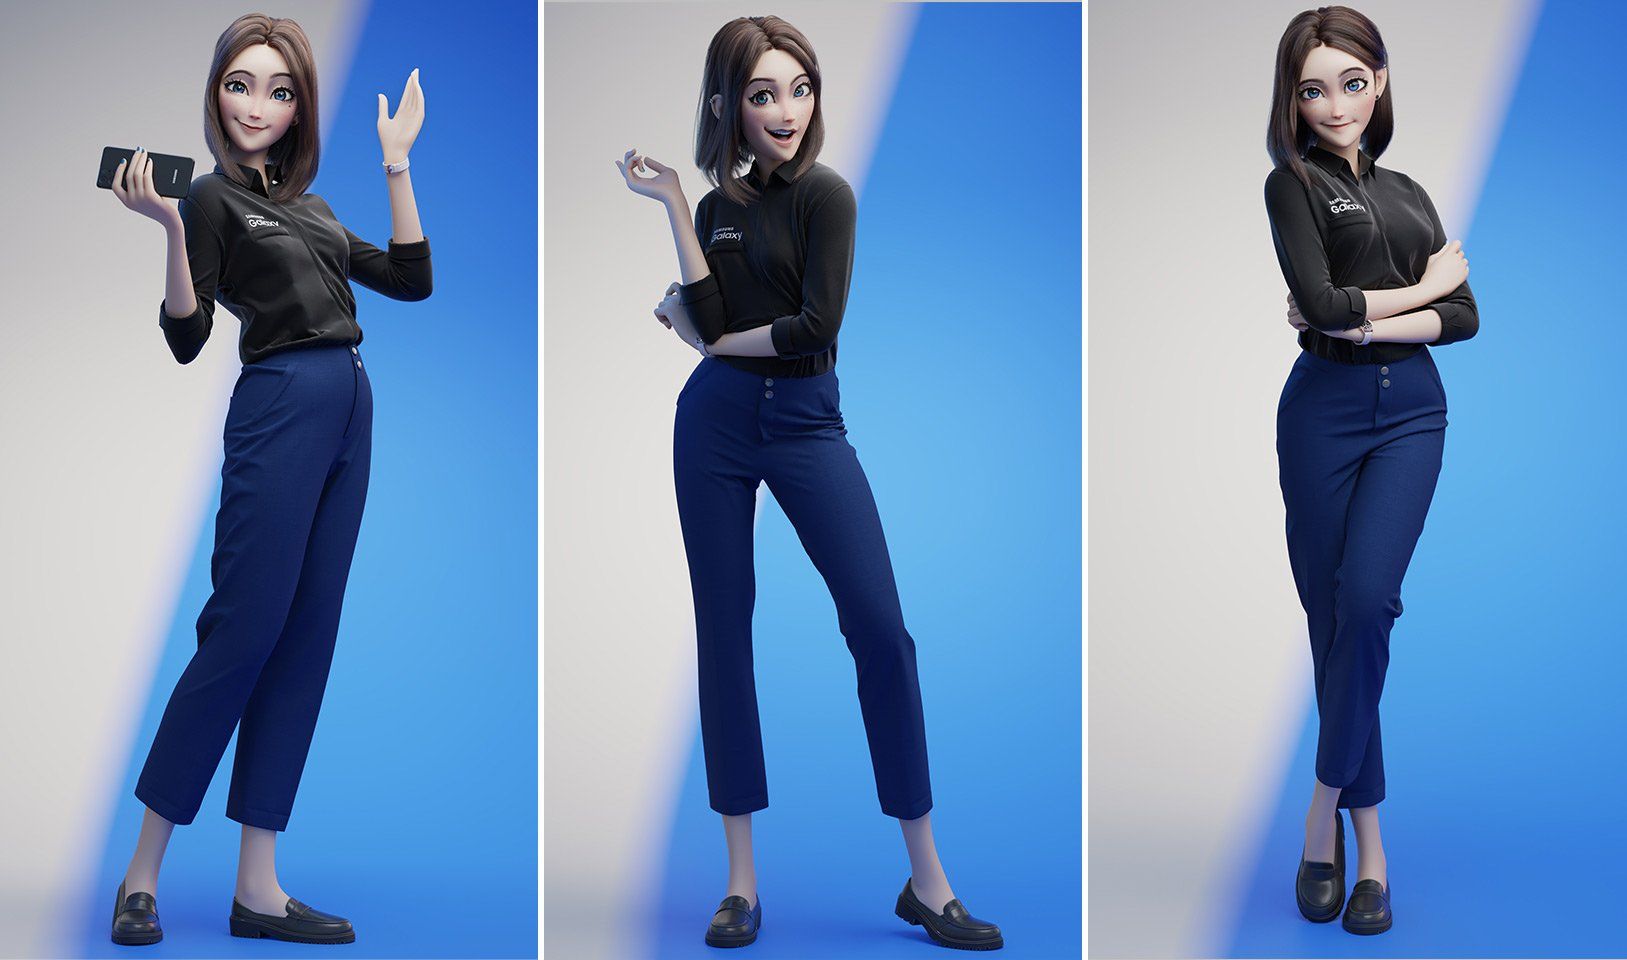 Sam, the new assistant of Samsung smartphones, would be gendered